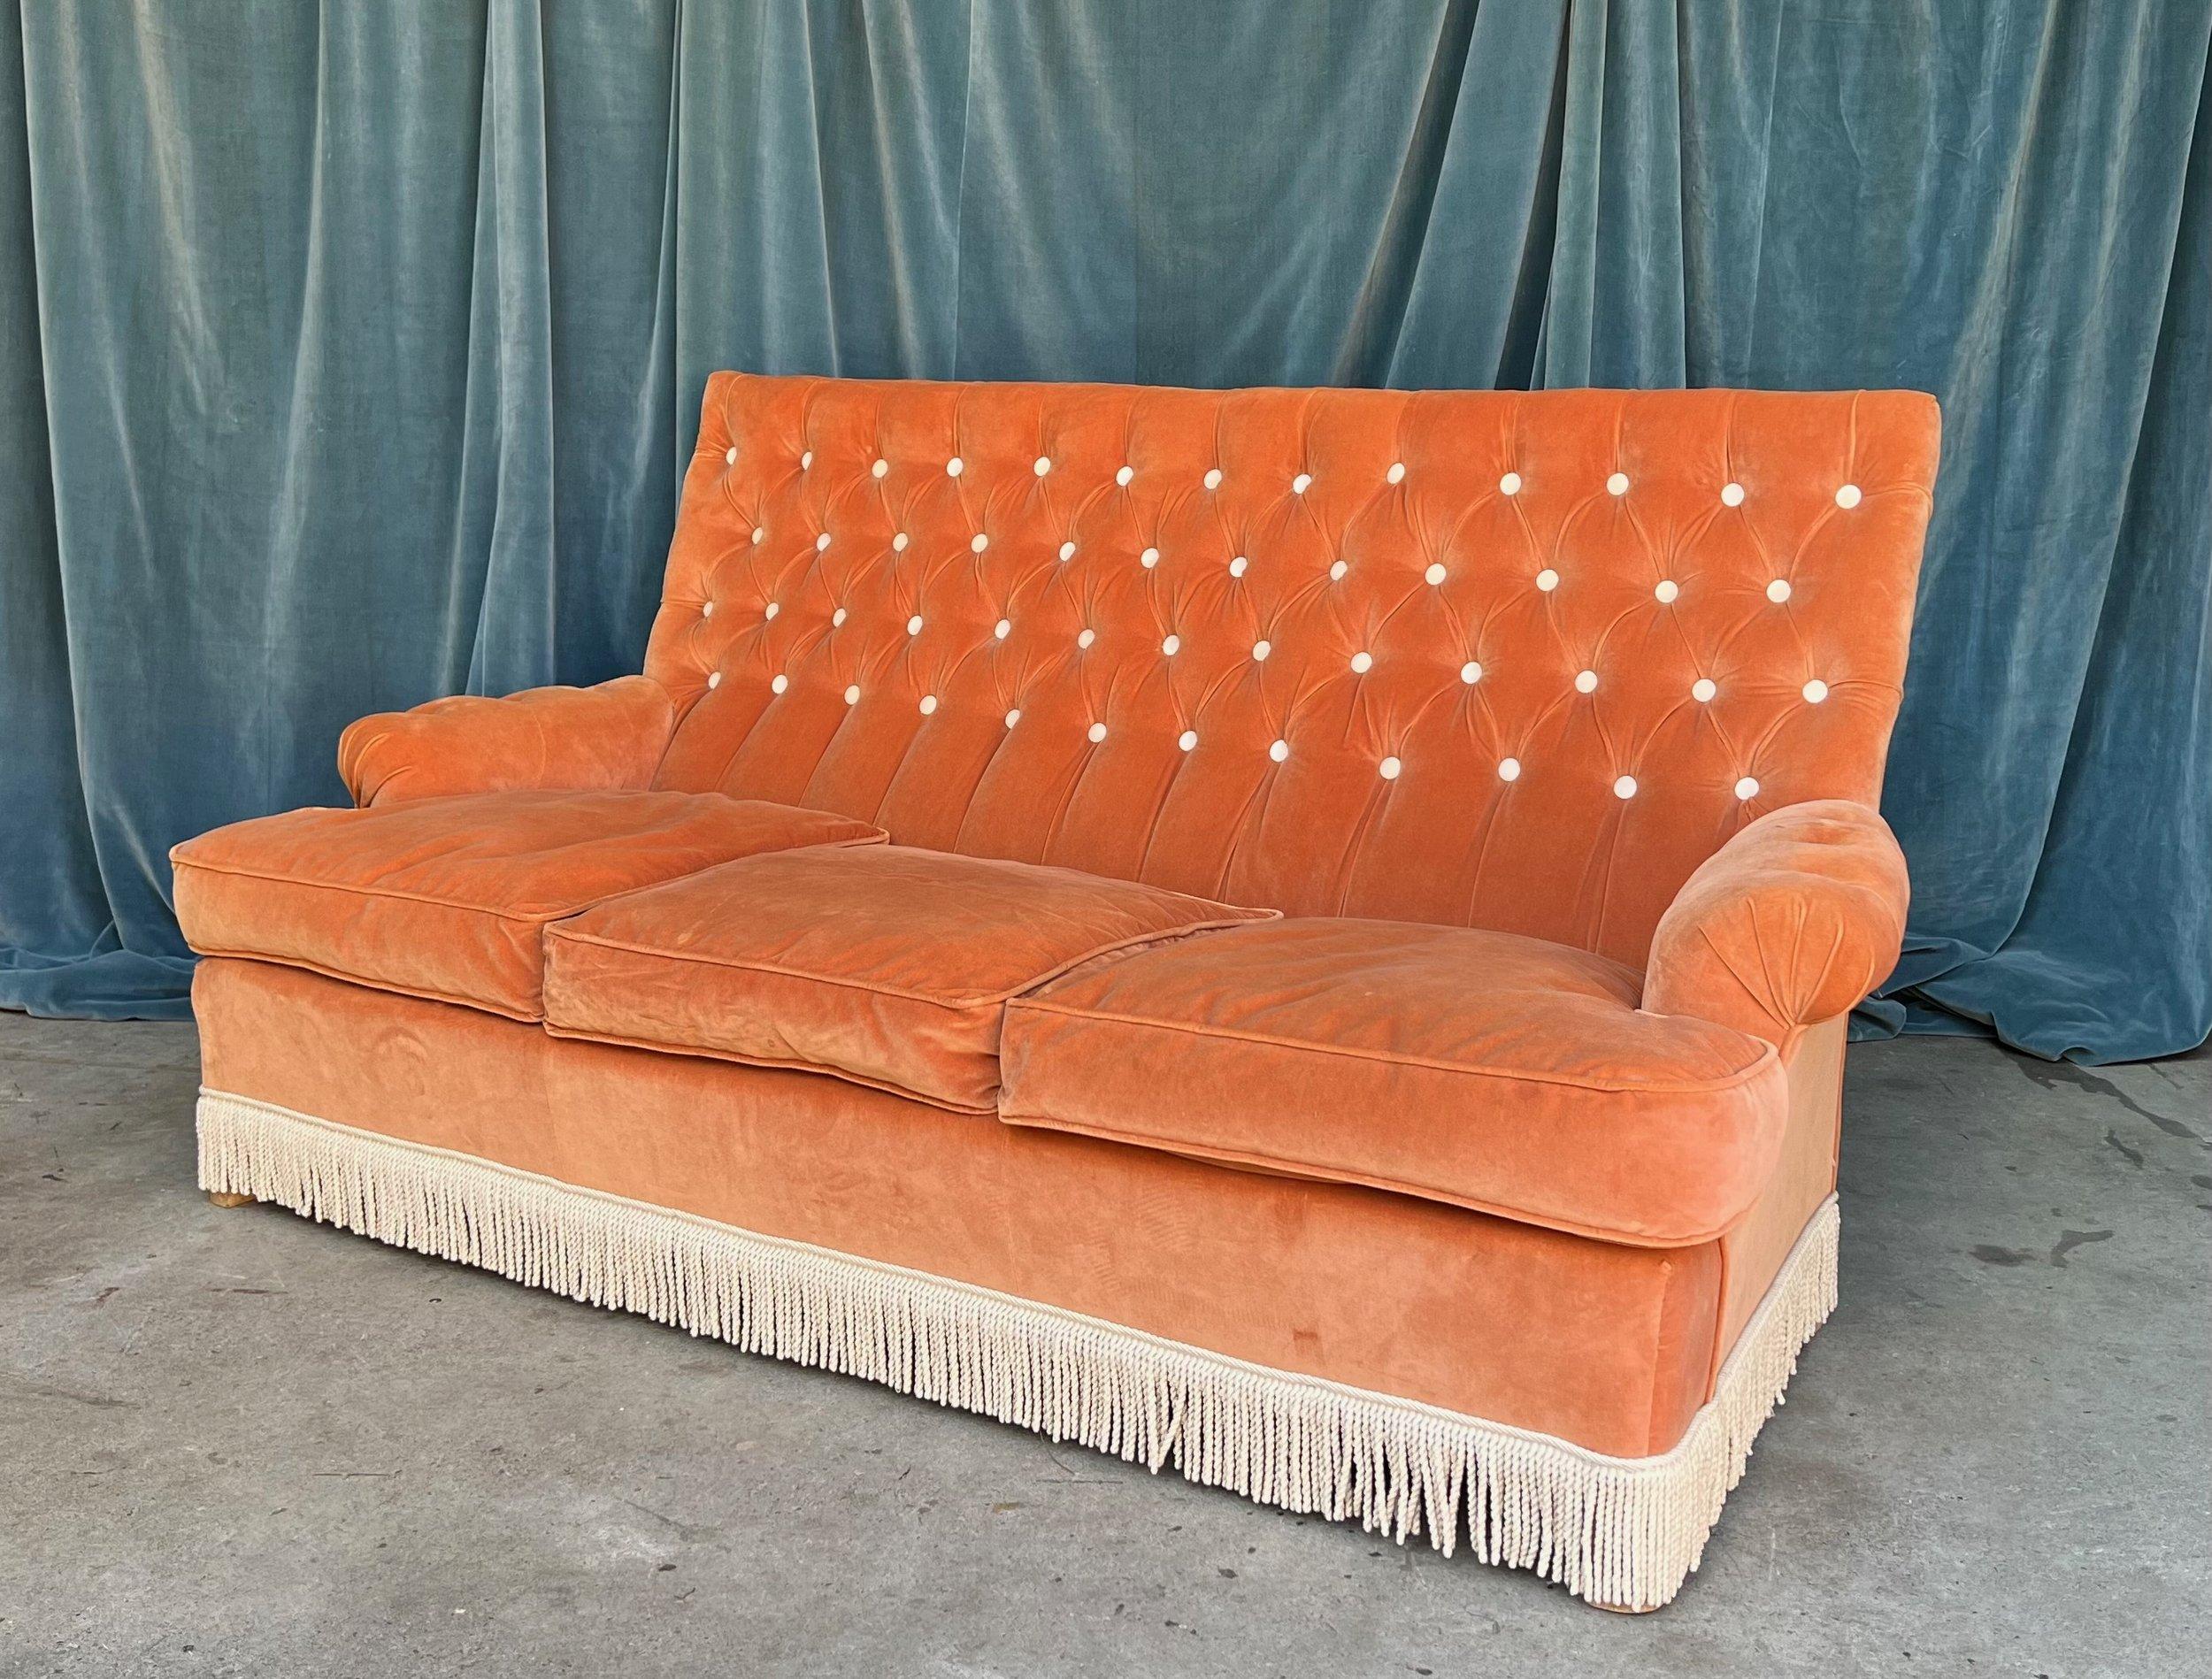 This stunning French high-back sofa, designed in the opulent Napoleon III style, is the embodiment of luxury and elegance. Upholstered in a pale orange tangerine velvet, the back and arms of the sofa feature a diamond tufting pattern, emphasized by